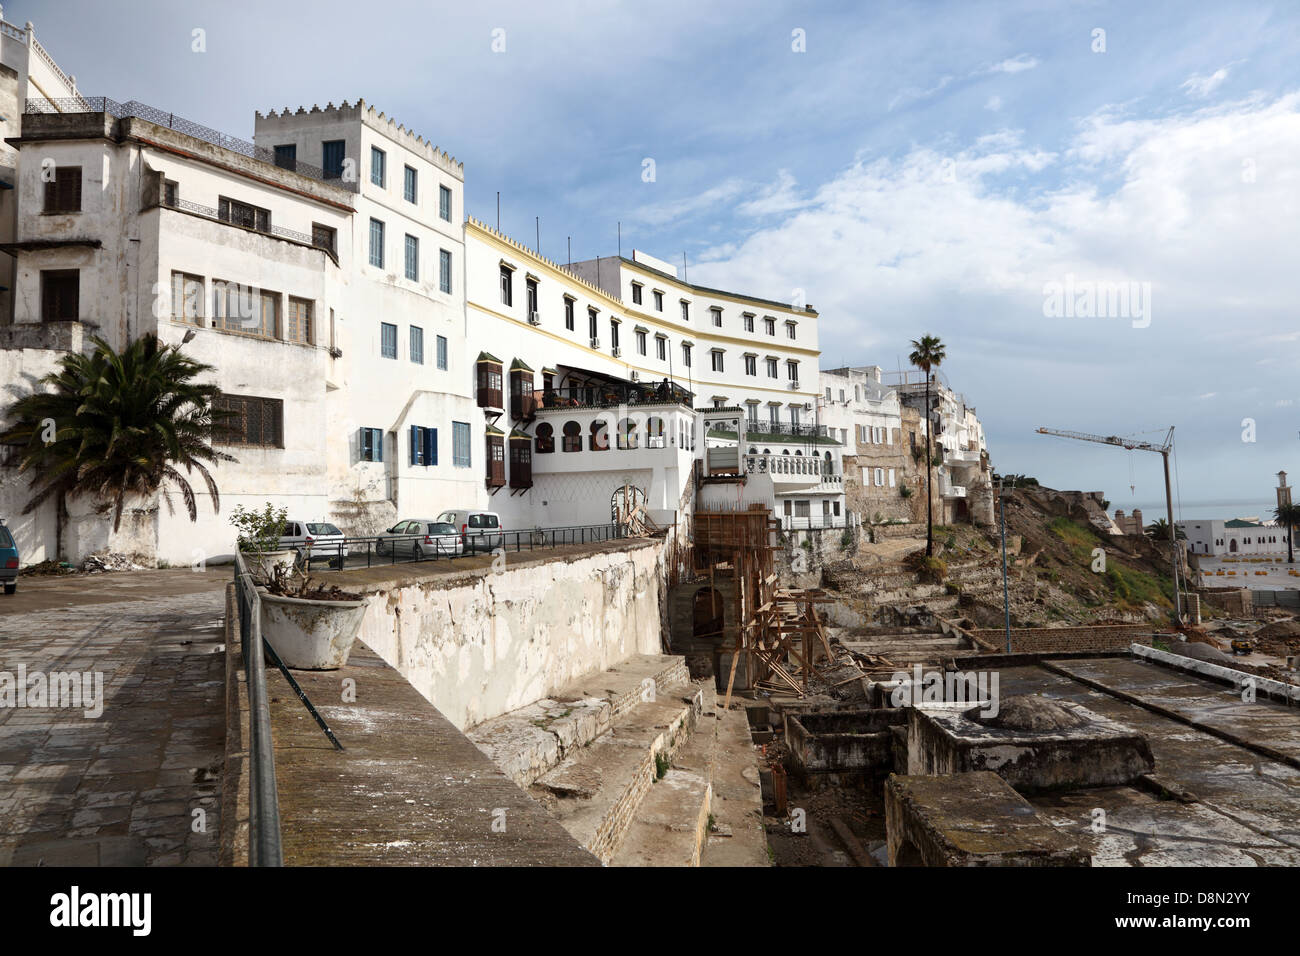 Waterfront buildings in Tangier, Morocco Stock Photo